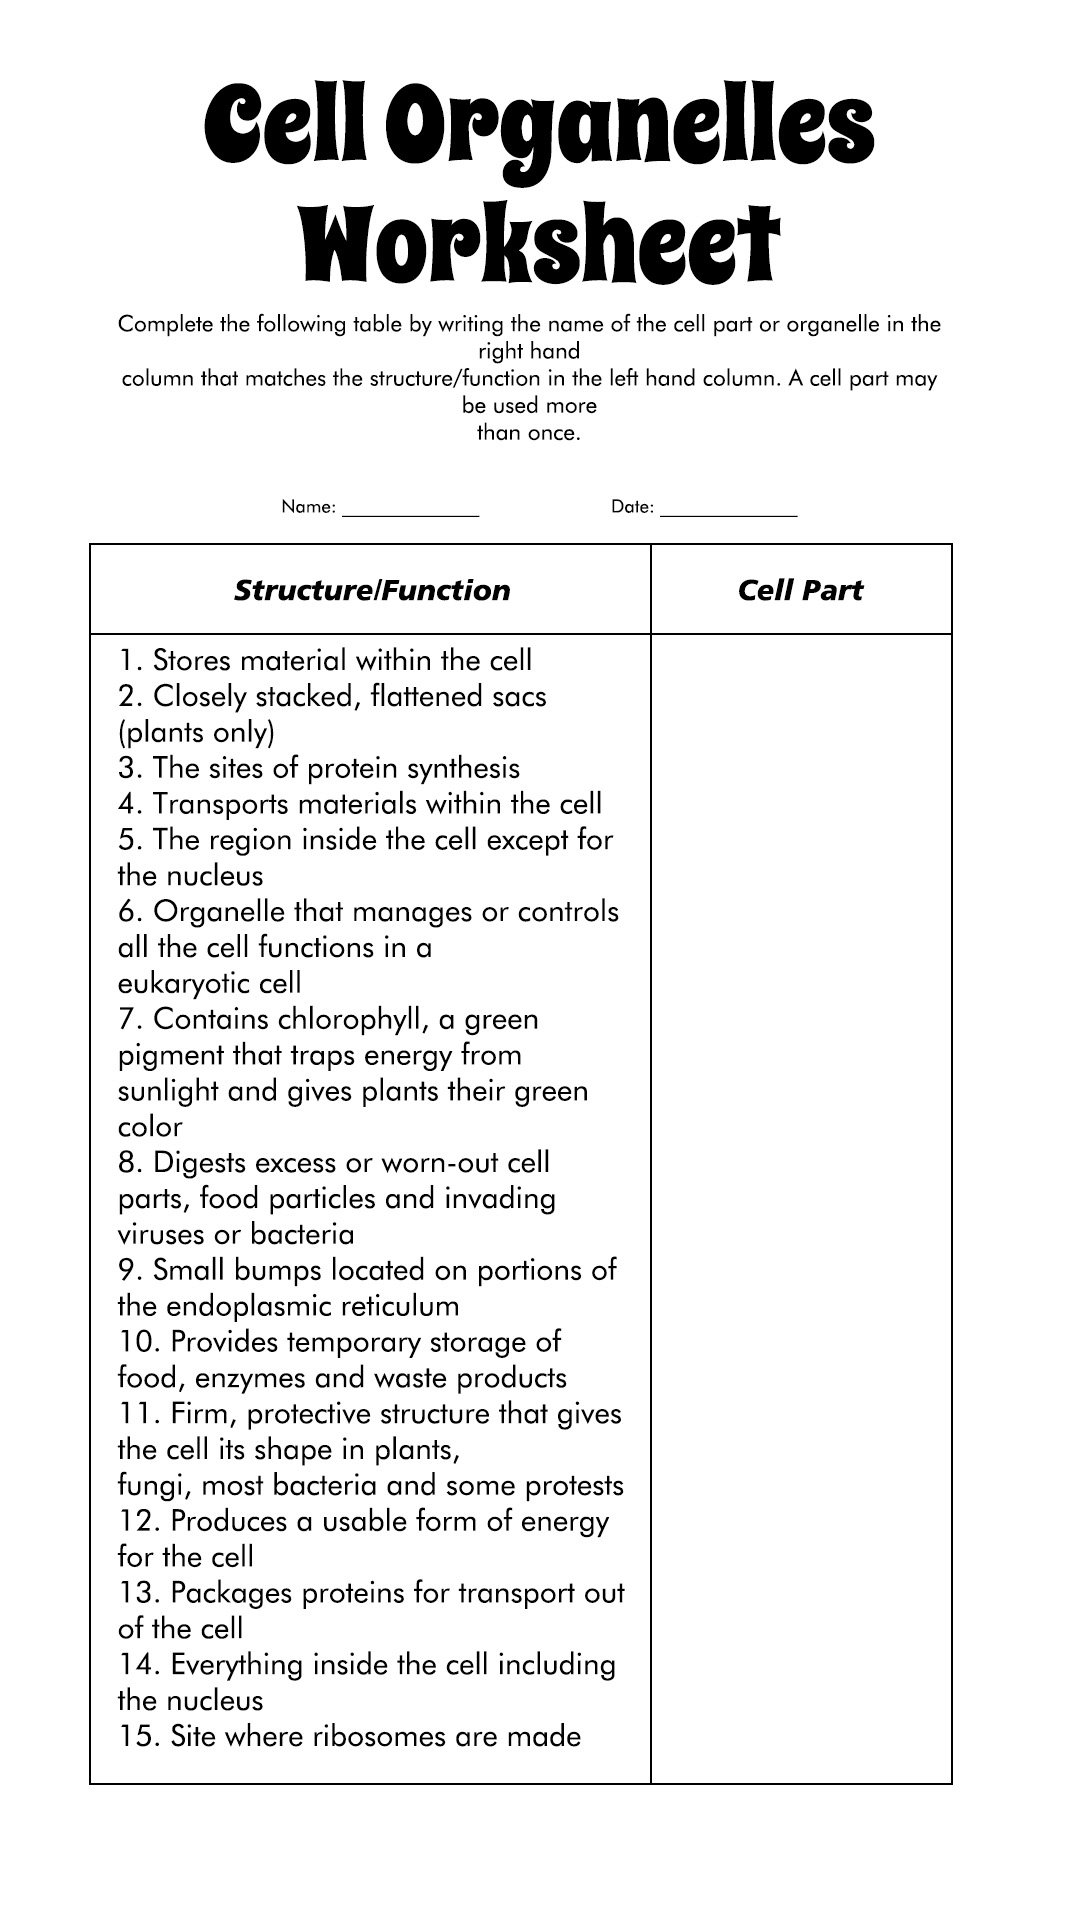 Cell Organelles and Functions Worksheet